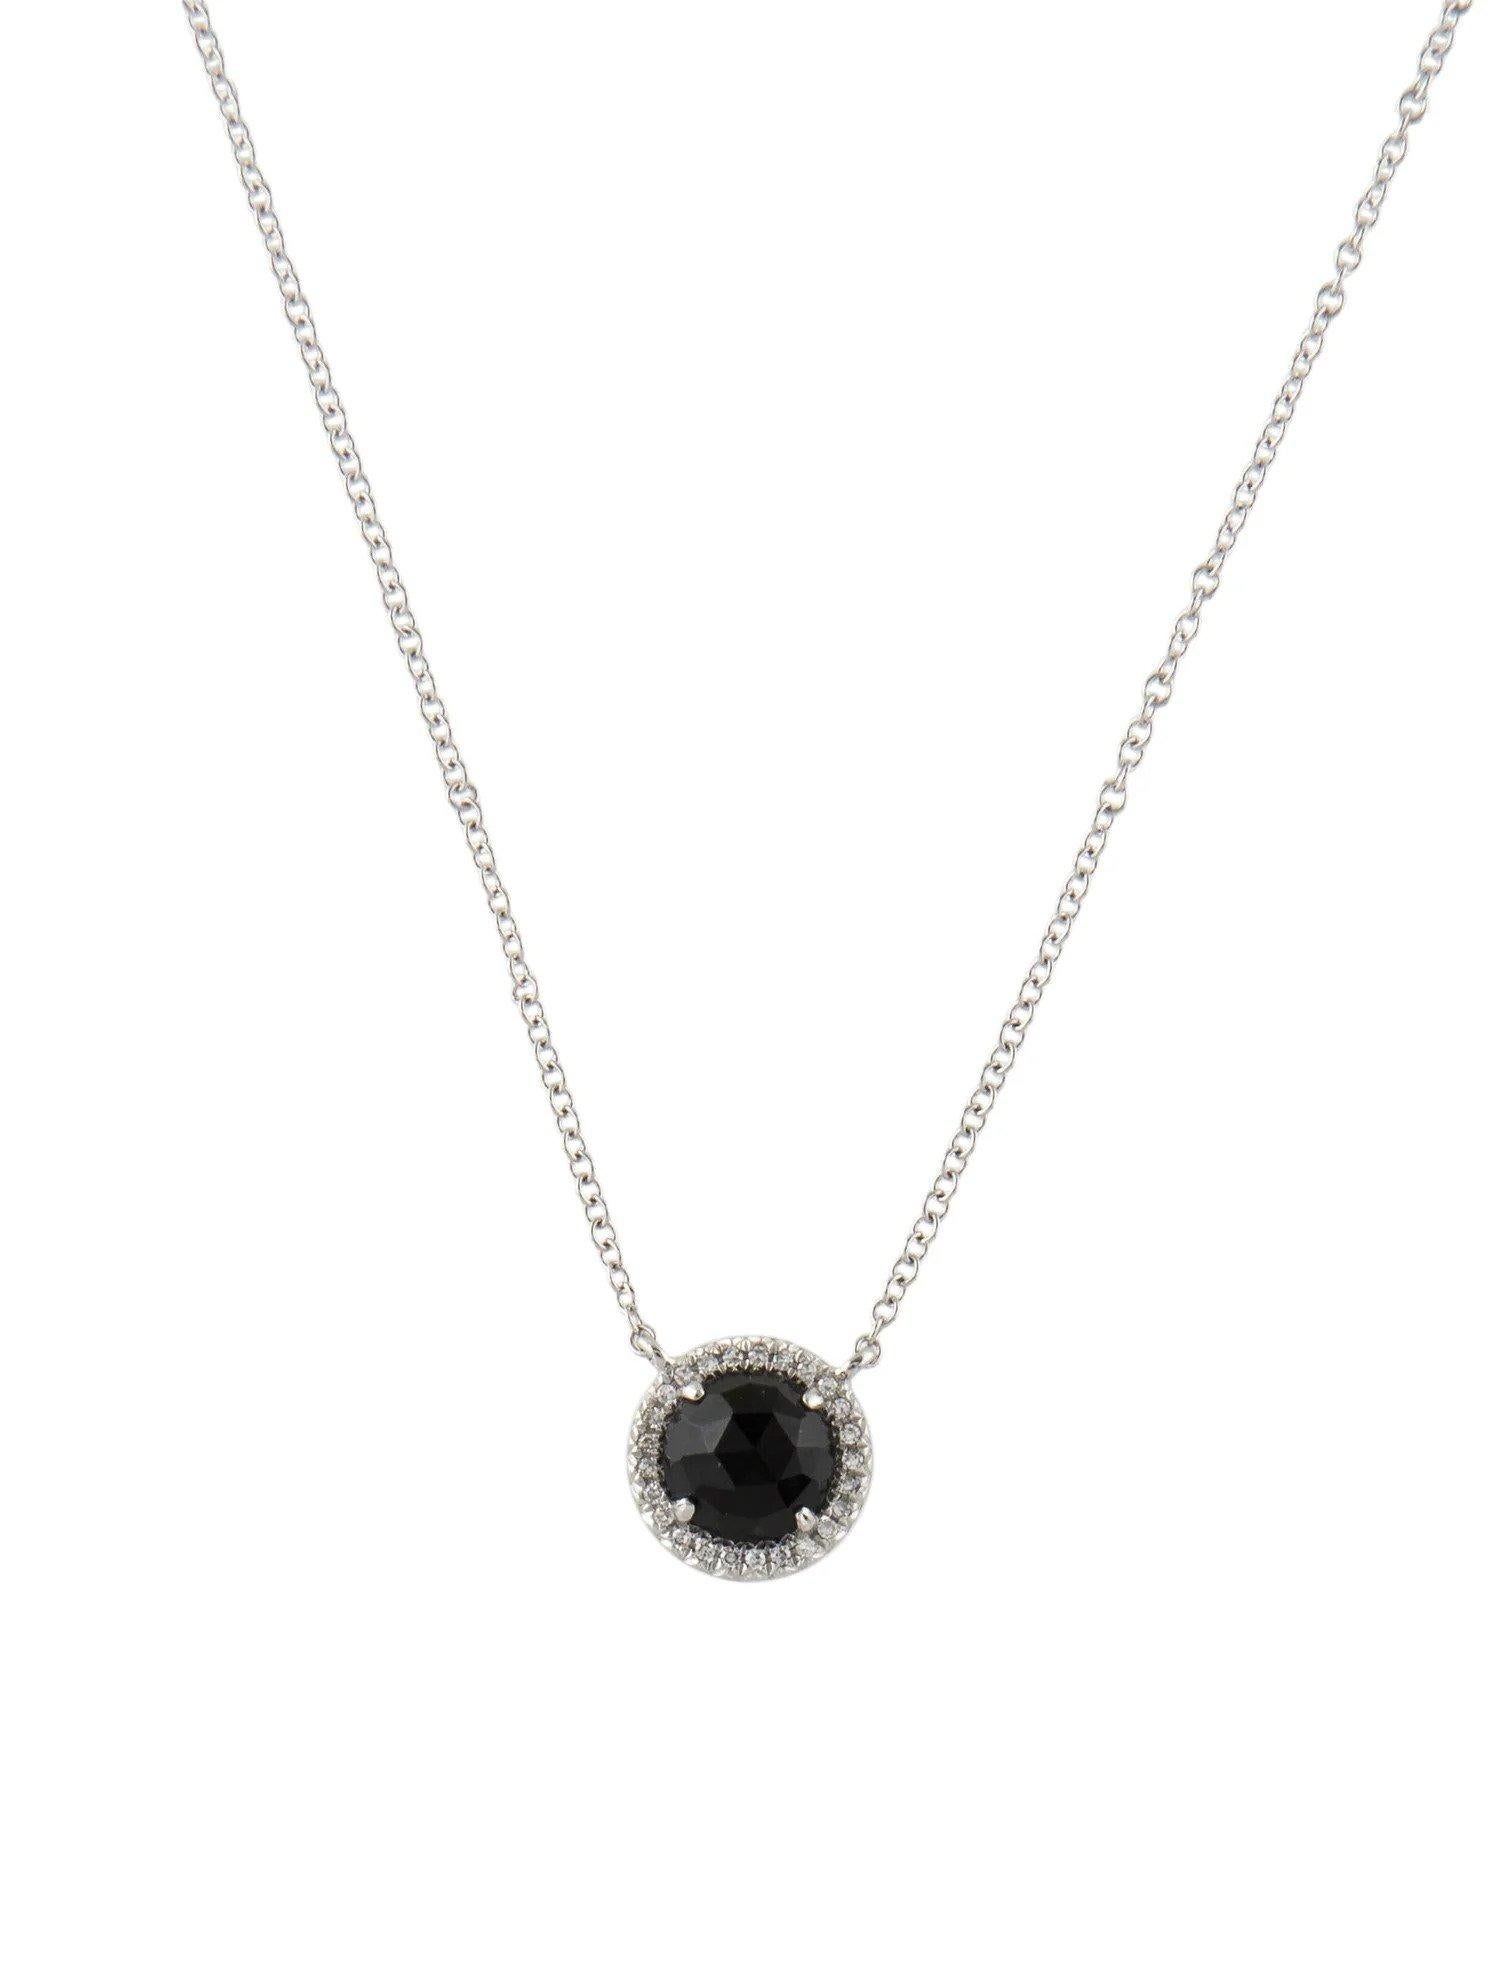 1.00 Carat Round Black Onyx & Diamond White Gold Pendant Necklace  In New Condition For Sale In Great Neck, NY